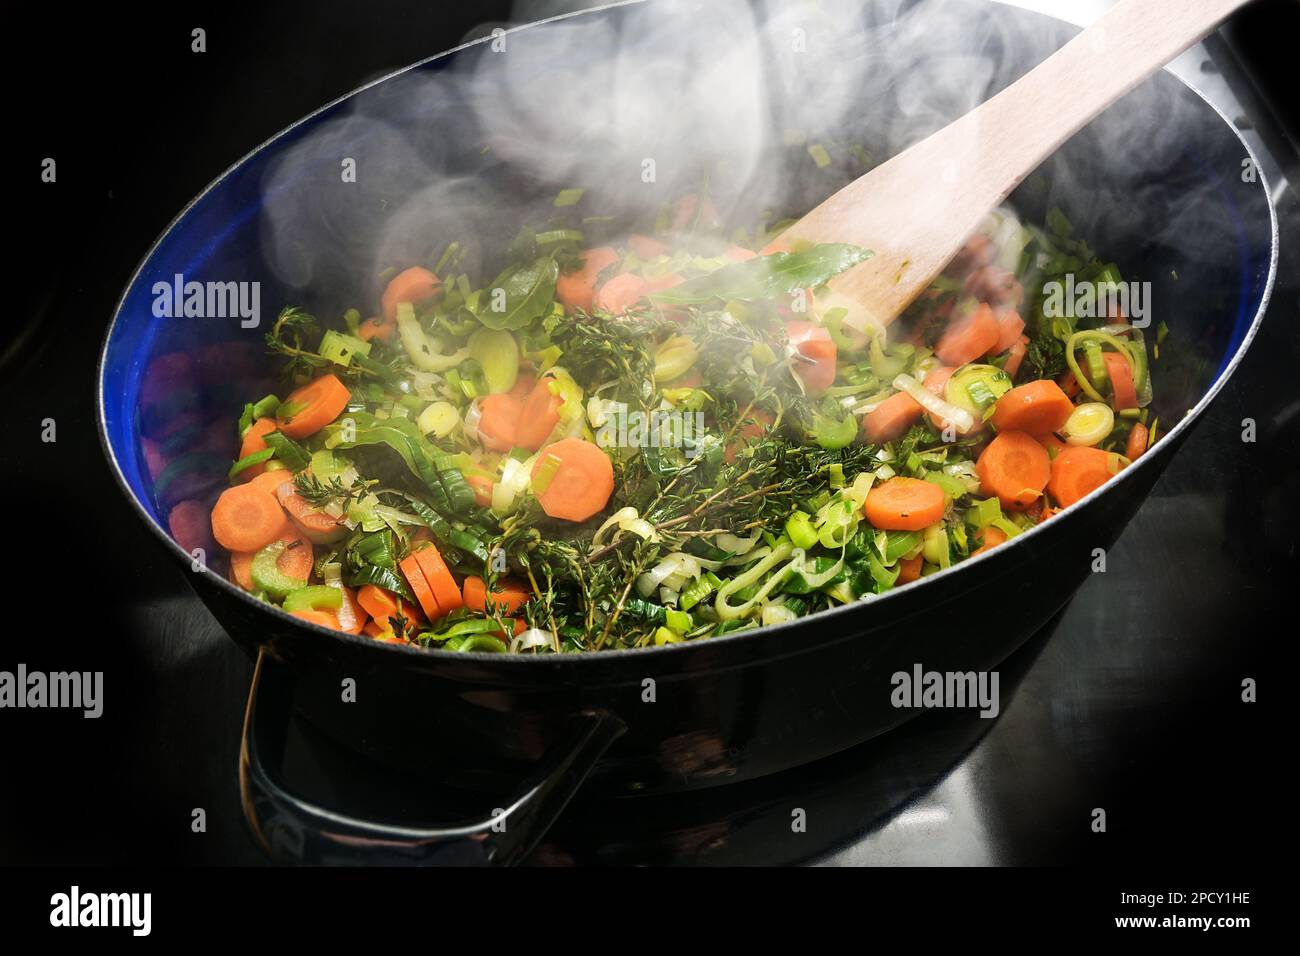 Steaming vegetables and herbs in a cooking pan on the black stove top, ingredients for a soup like carrots, celery, leek, thyme and bay leaves, copy s Stock Photo